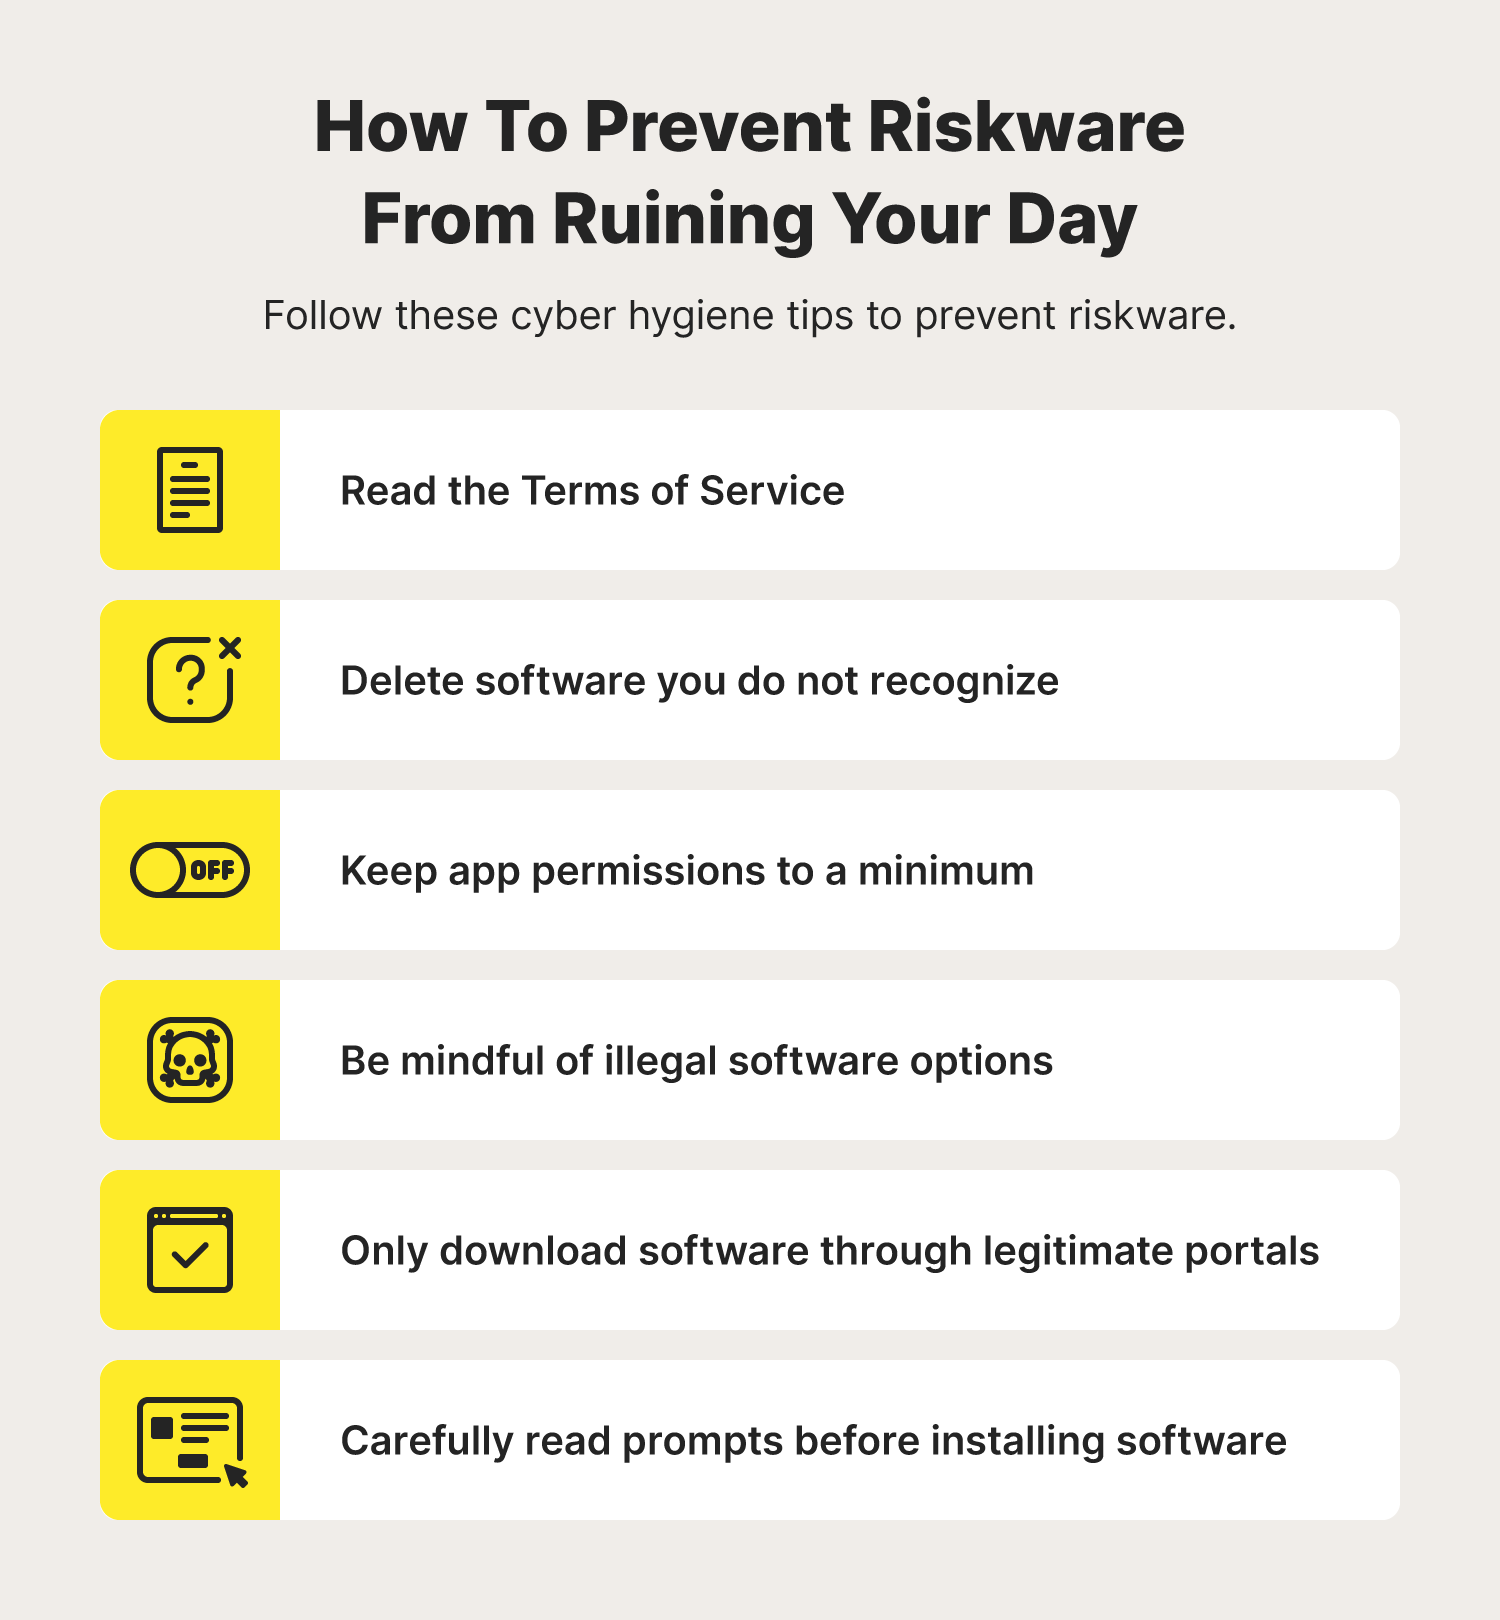 A graphic shares six tips to prevent riskware from ruining your day.